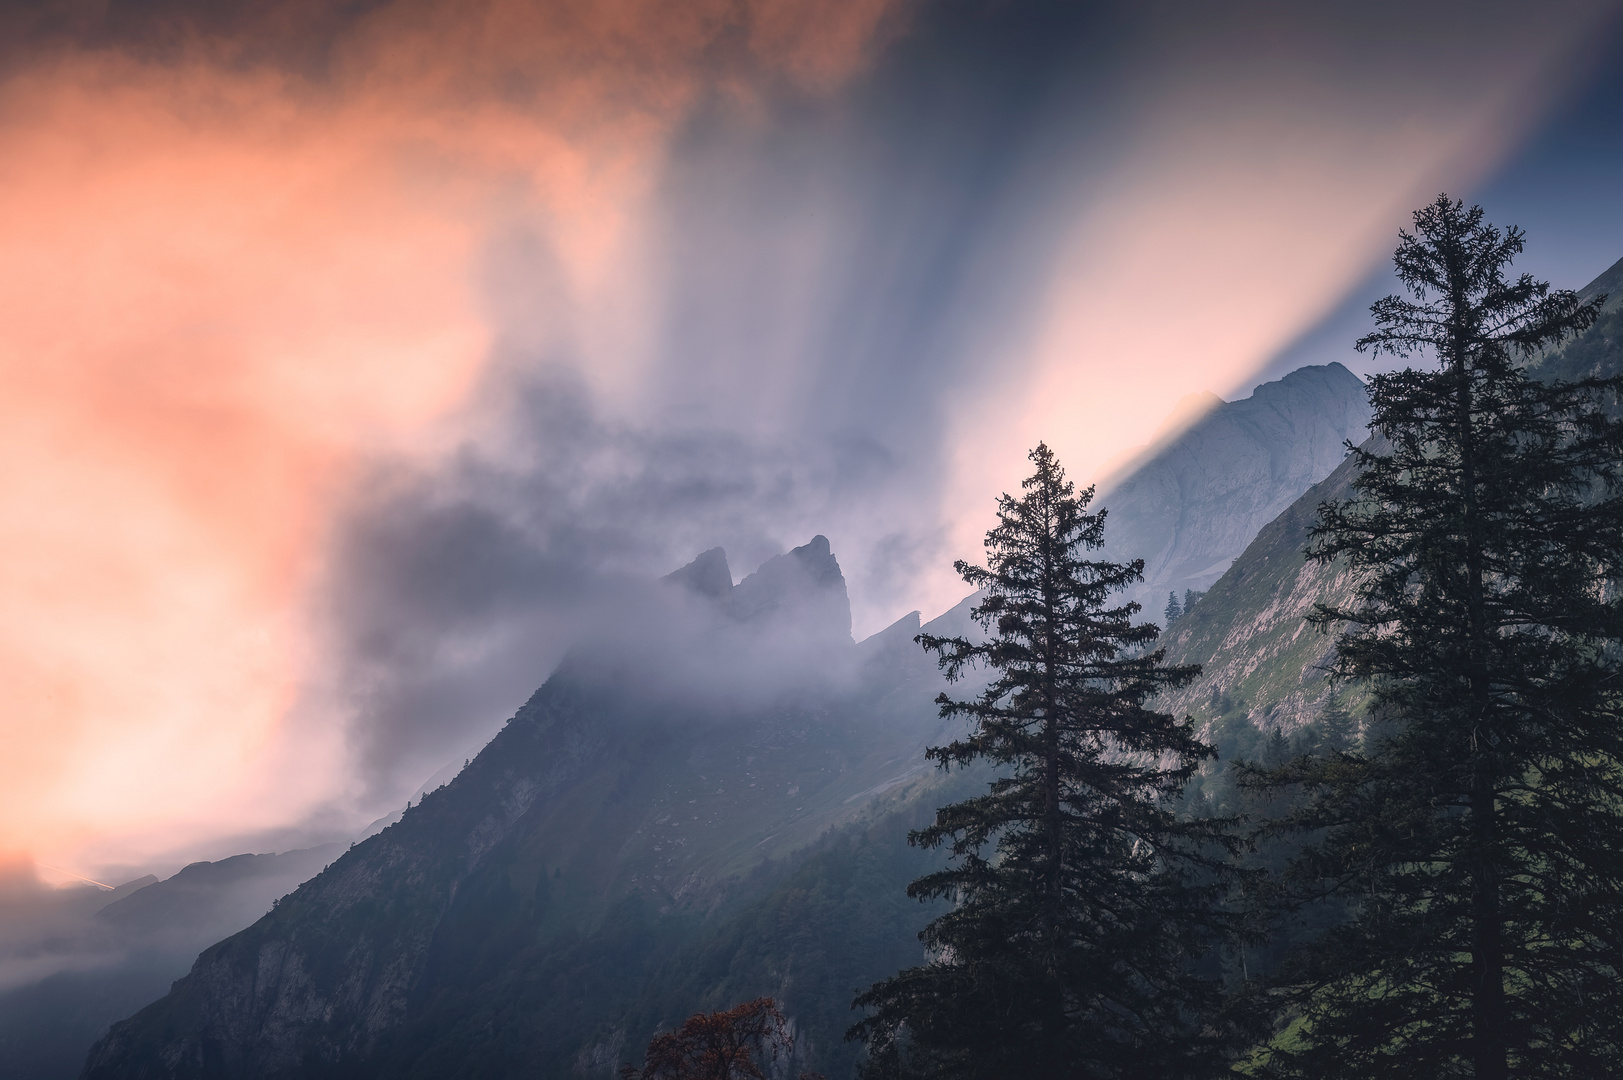 *** Last Sunbeams of a Moody Evening in Swiss Mountains ***